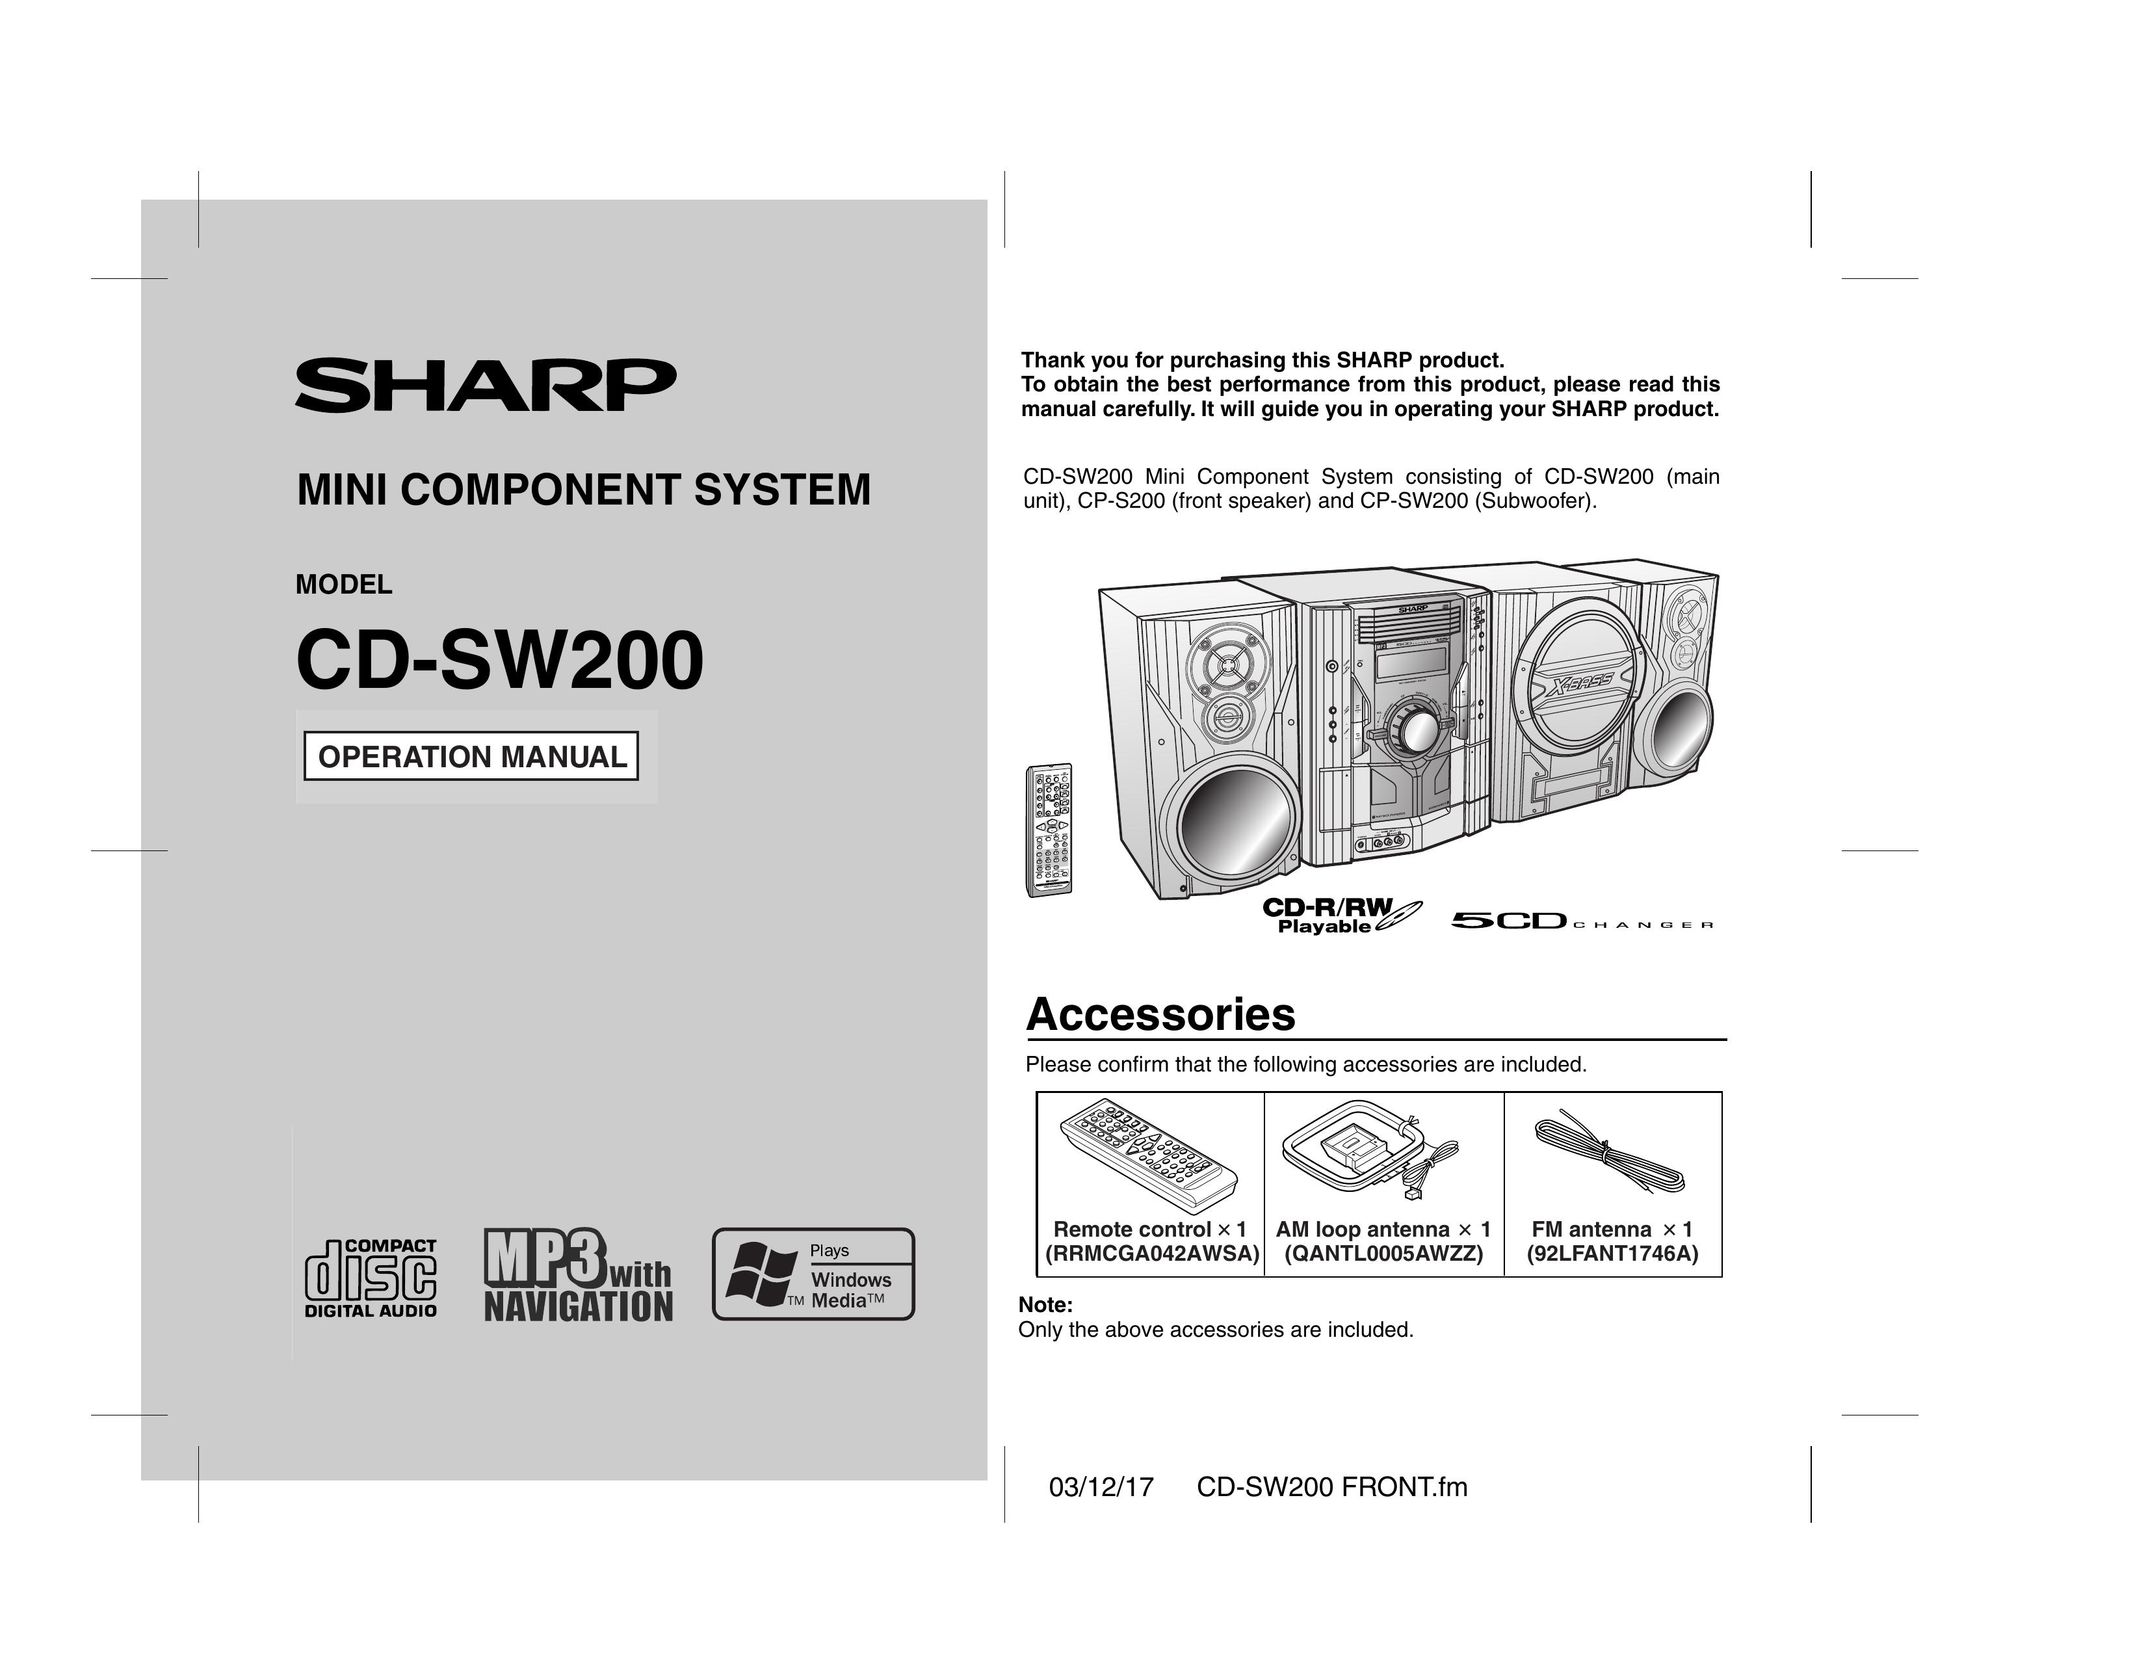 Sharp CD-SW200 Home Theater System User Manual